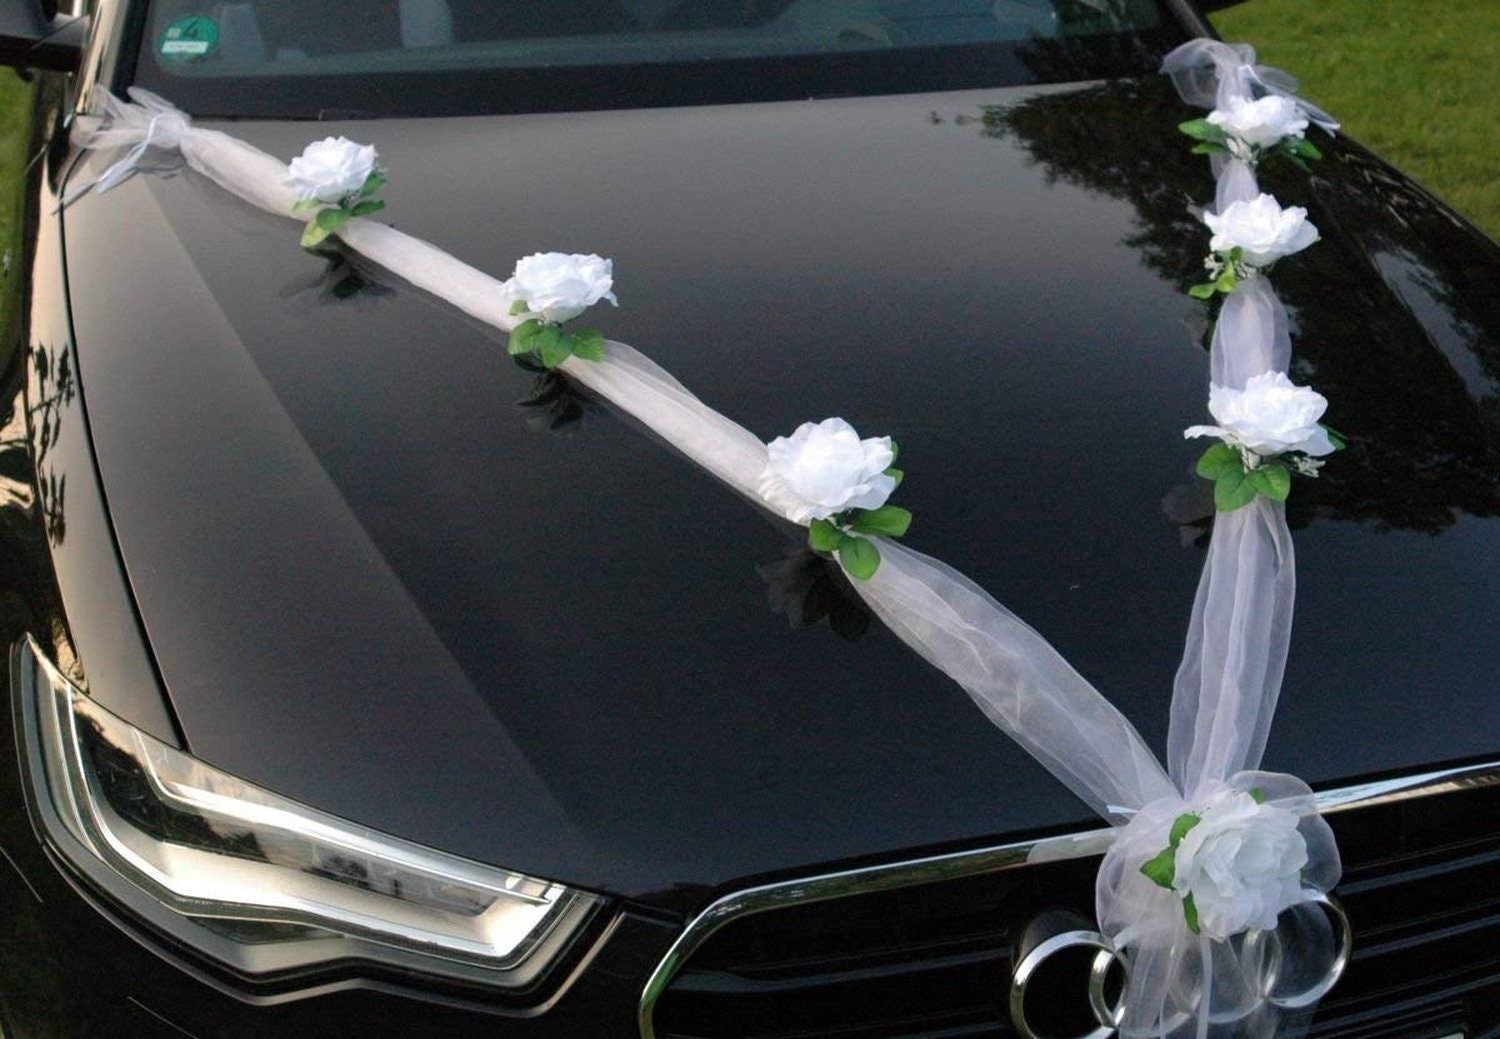 Wedding Car Decorations Full Kit Set White heart & flowers and FREE door  ribbons